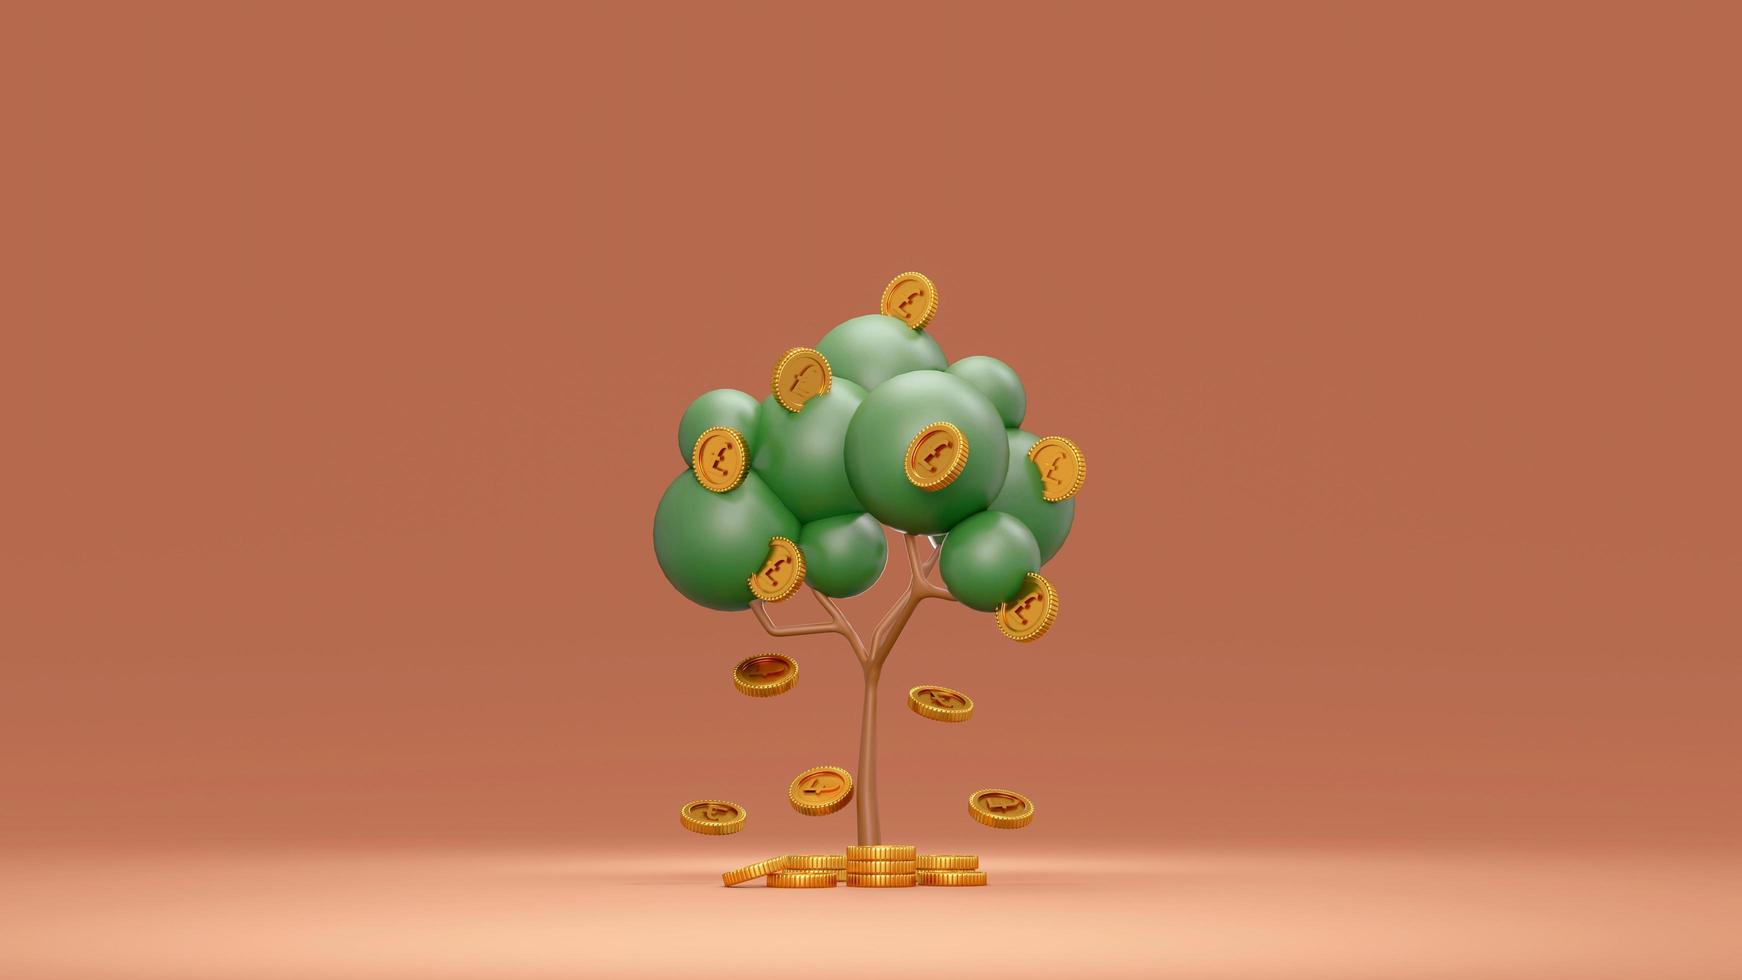 3d Rendering concept of financial growth. Money tree with coins falling down on background. 3D Render. 3D illustration. Pound sterling. photo